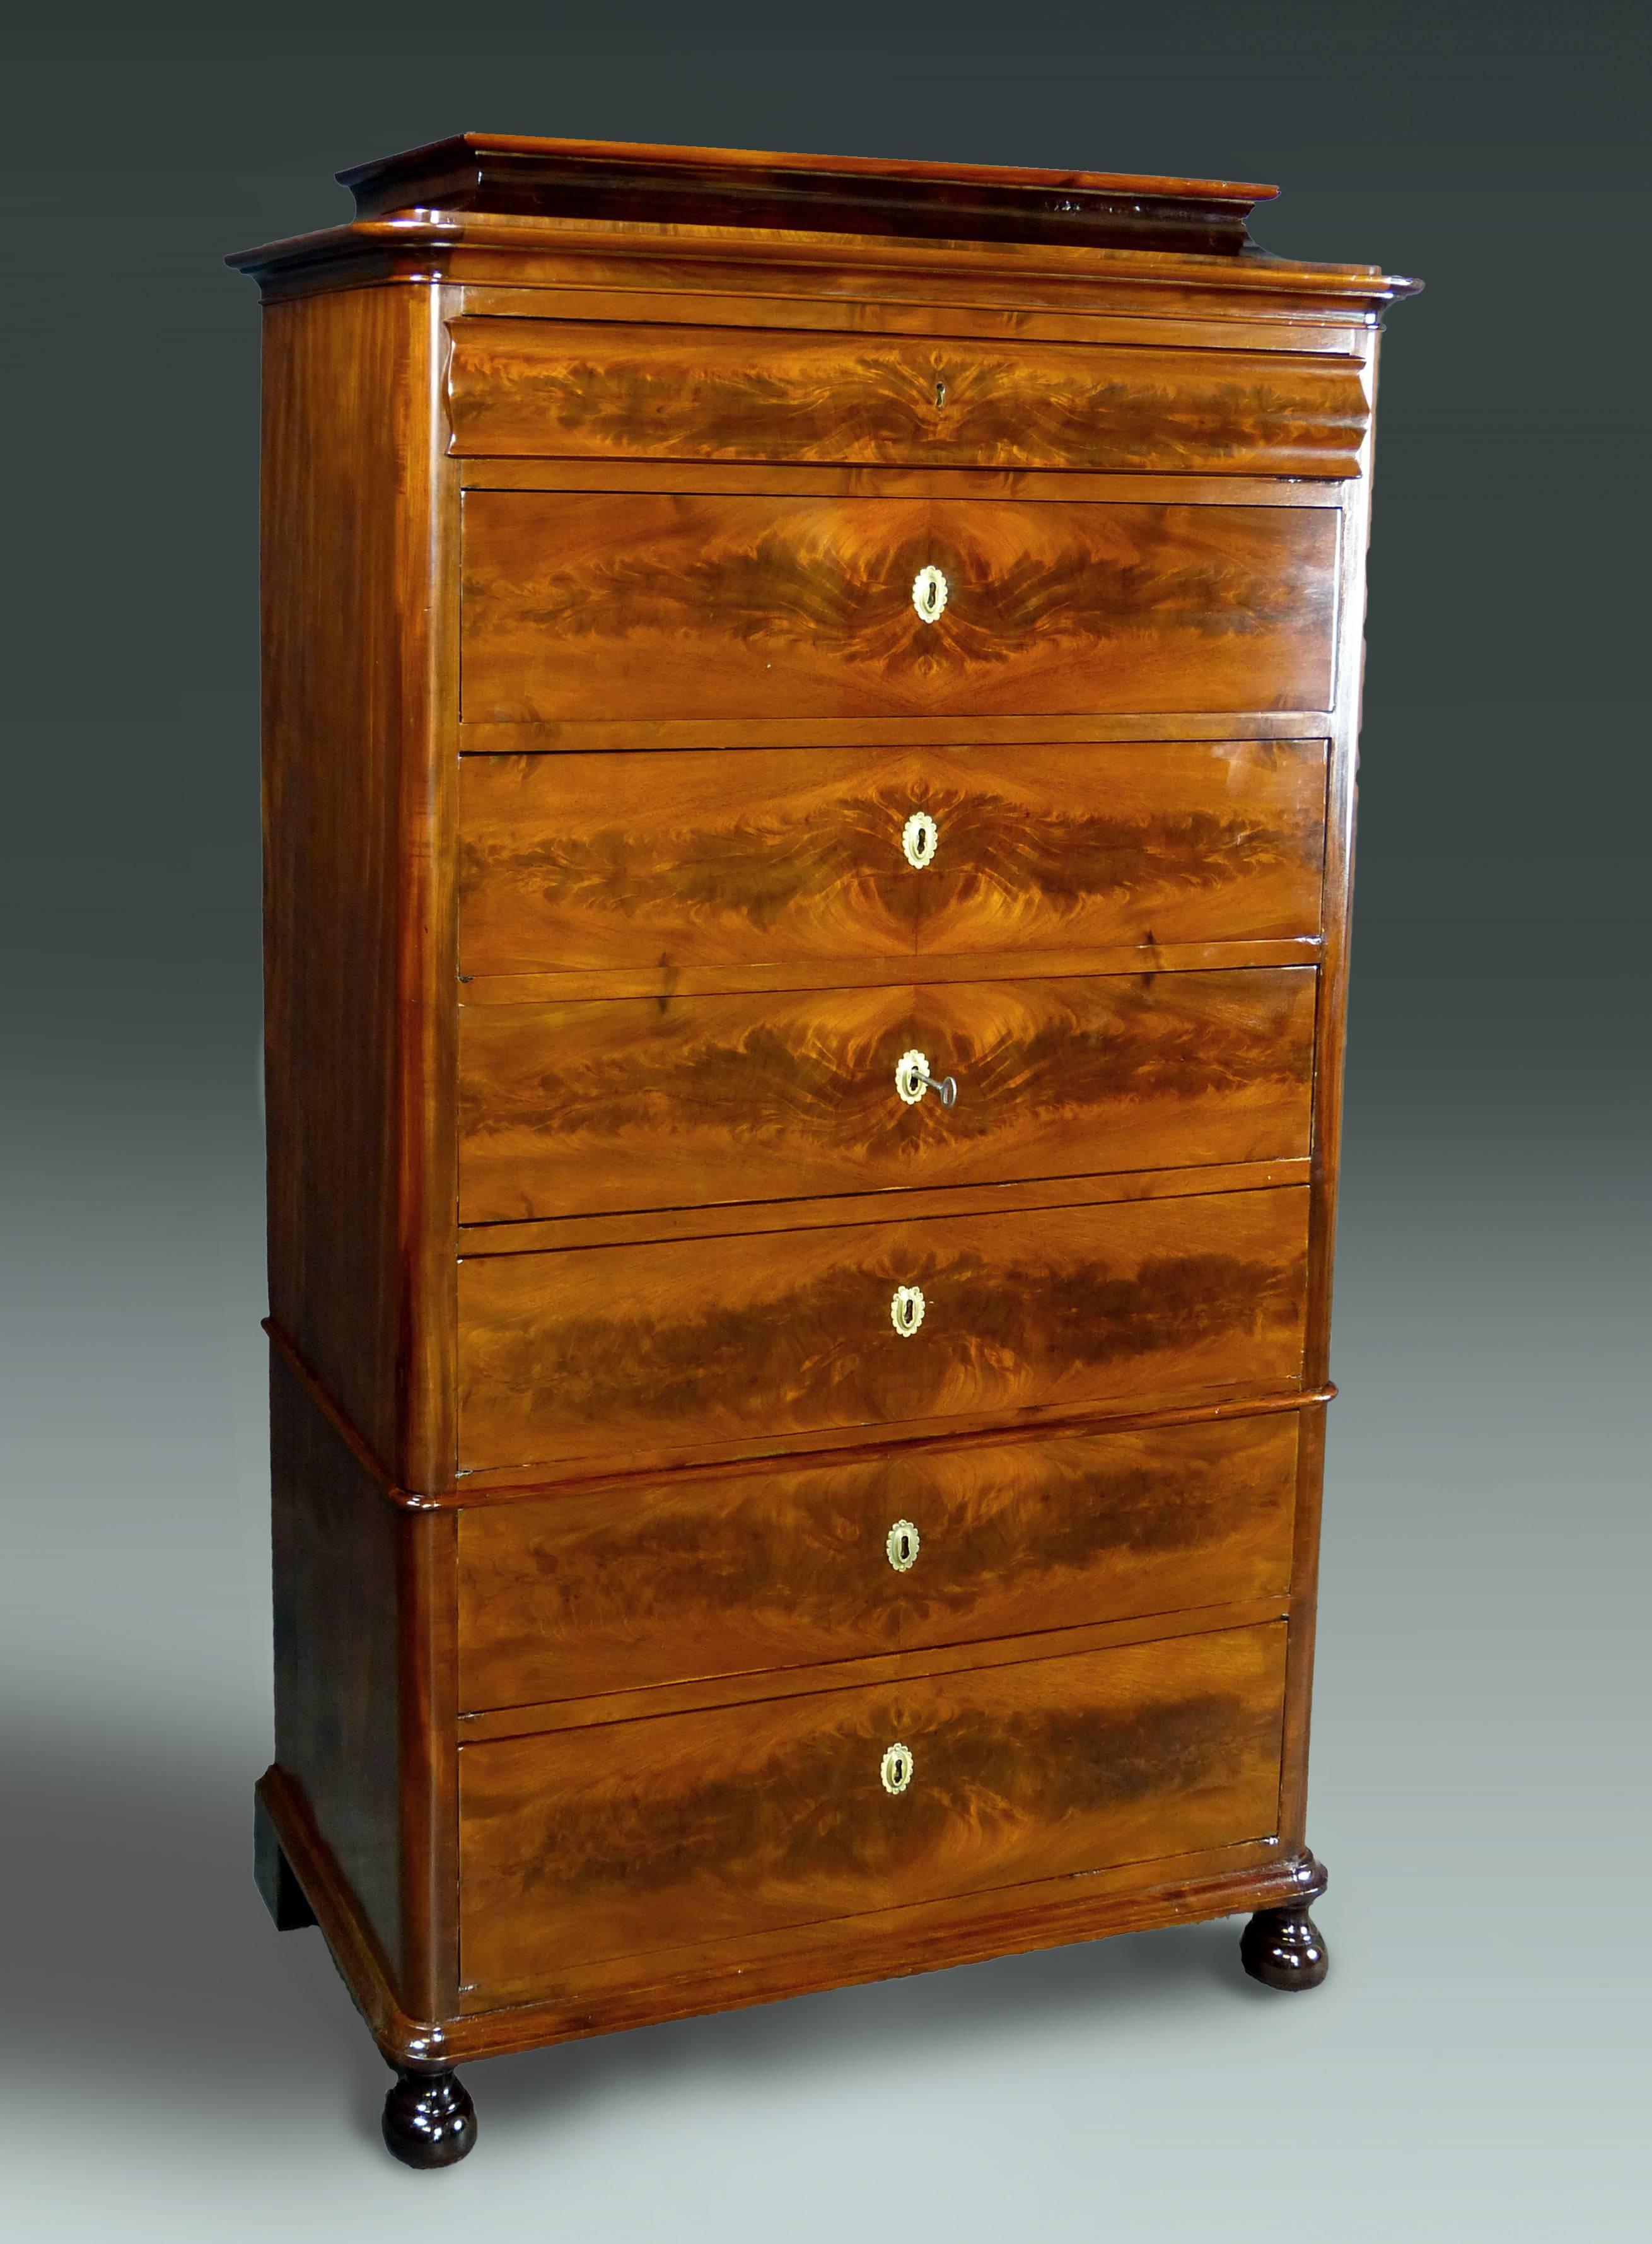 Attractive flame mahogany tall Danish Biedermeier Pagoda Top commode dating to the second quarter of the 19th century. It is of the 